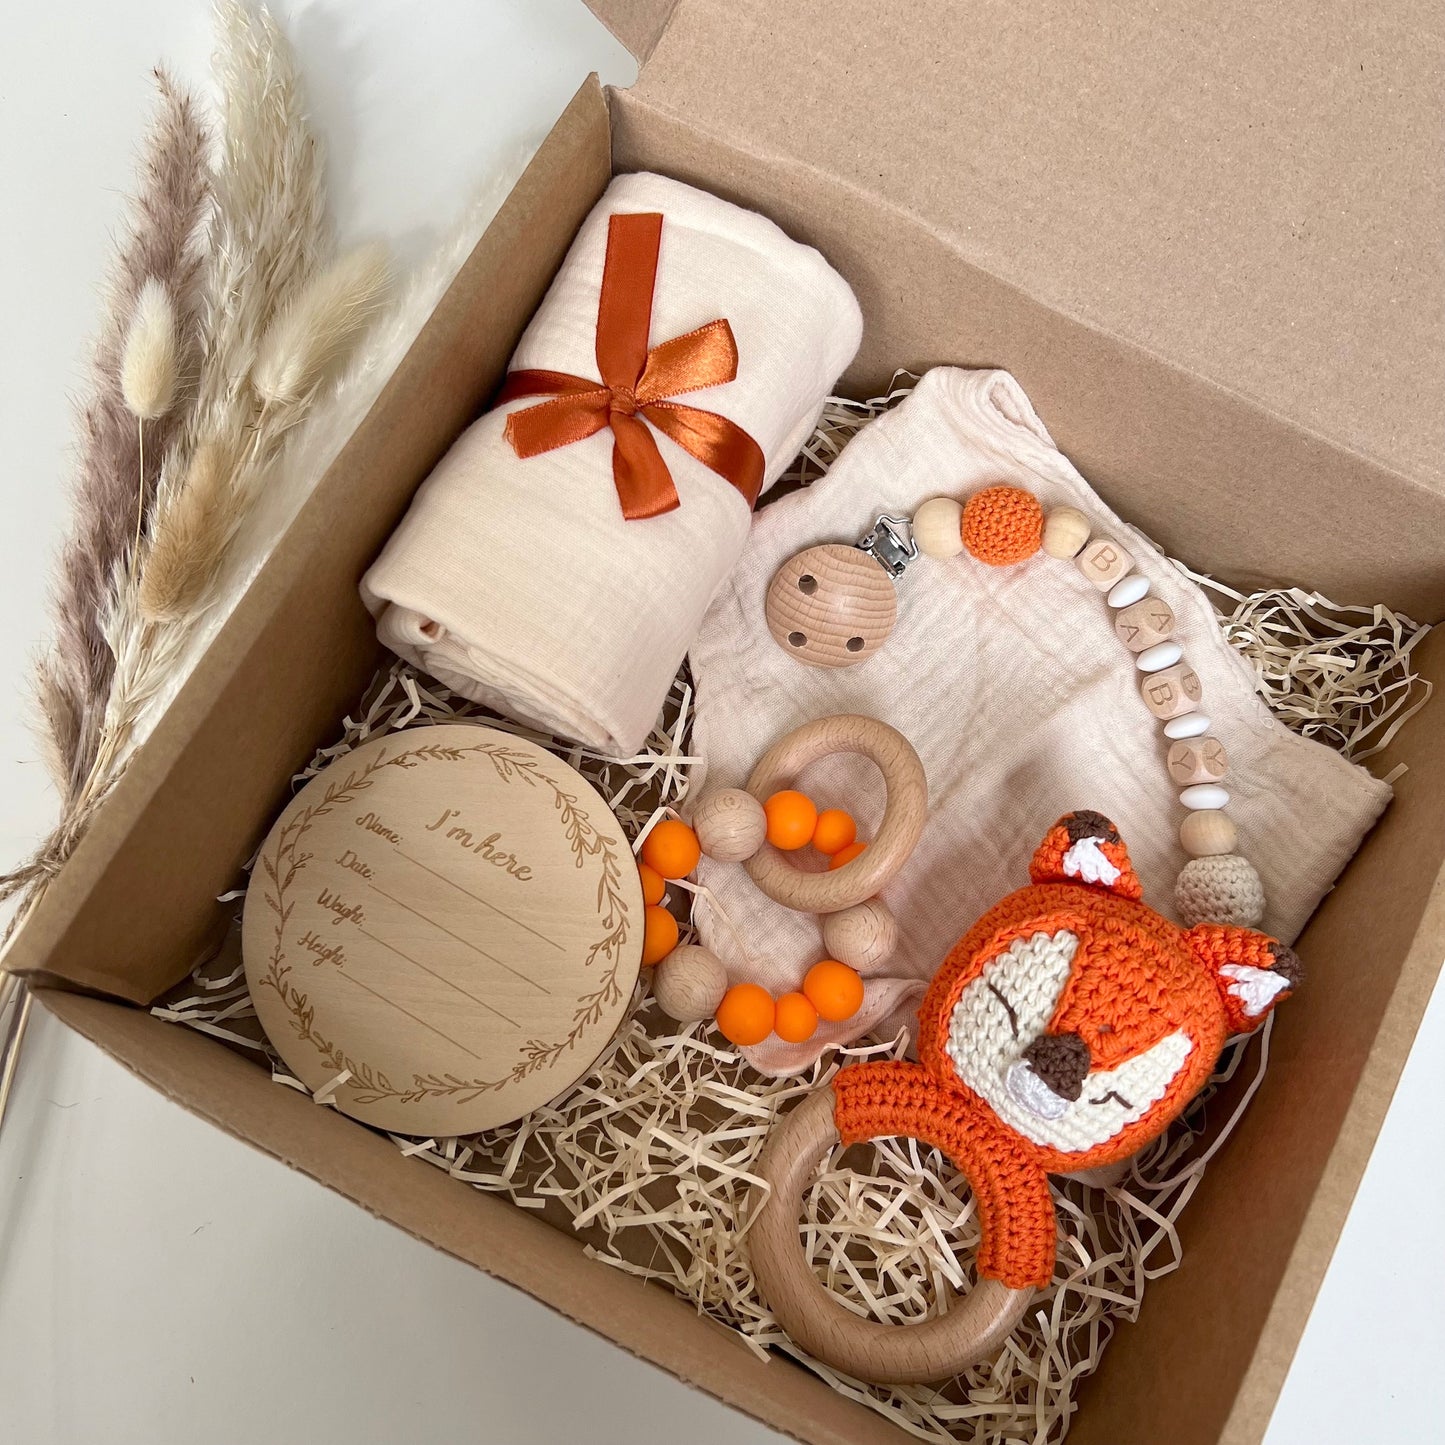 Personalised Baby Gift Set - 'I am here'